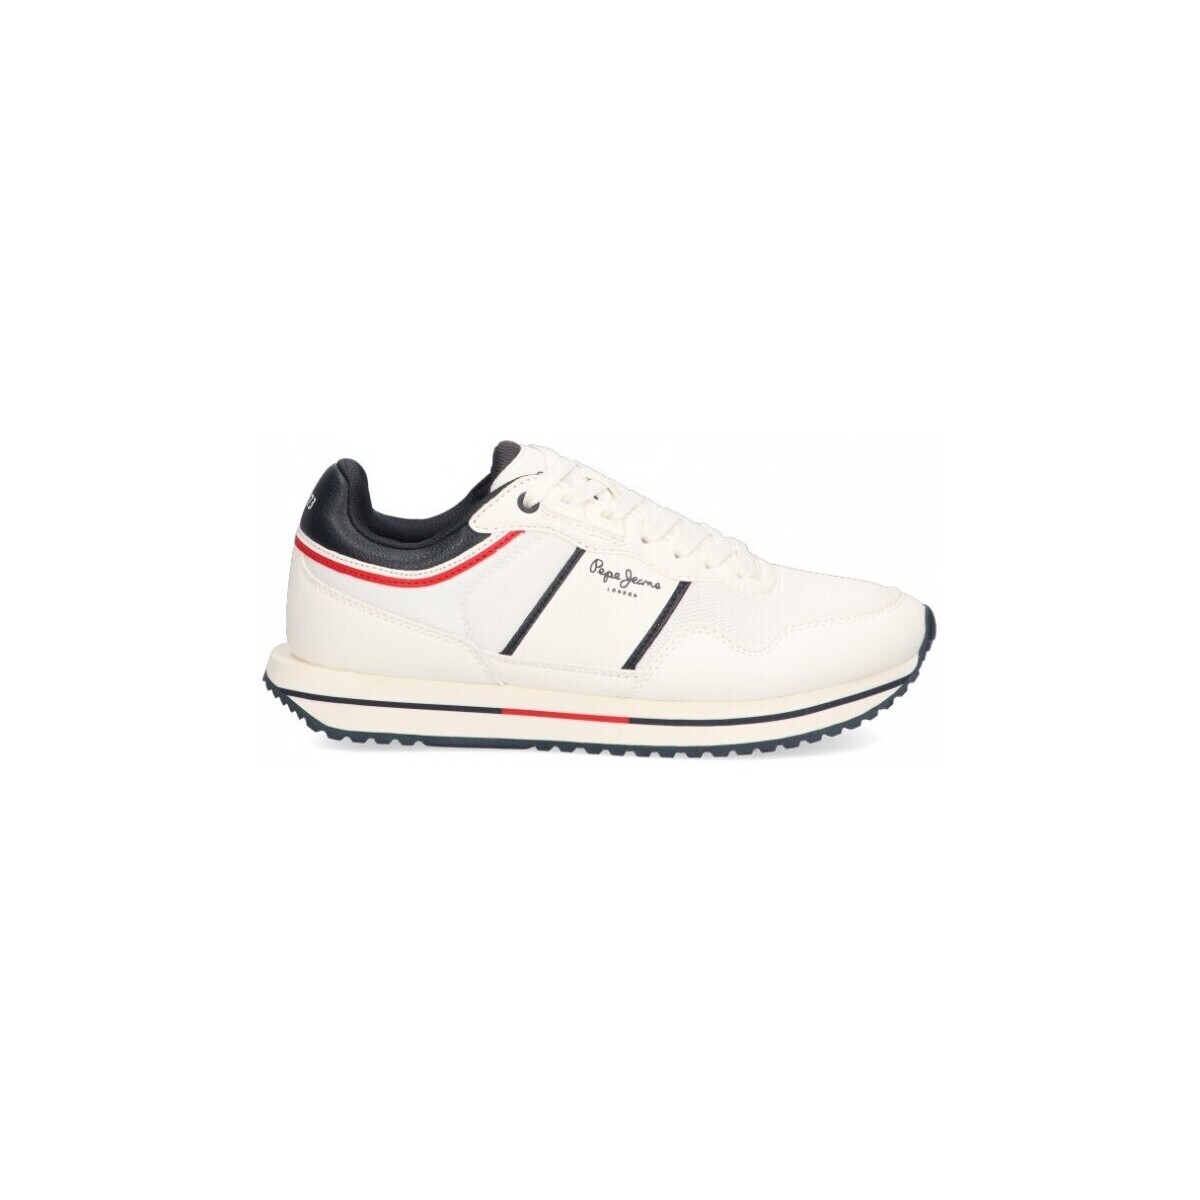 Pepe jeans  Sneakers Pepe jeans 70416